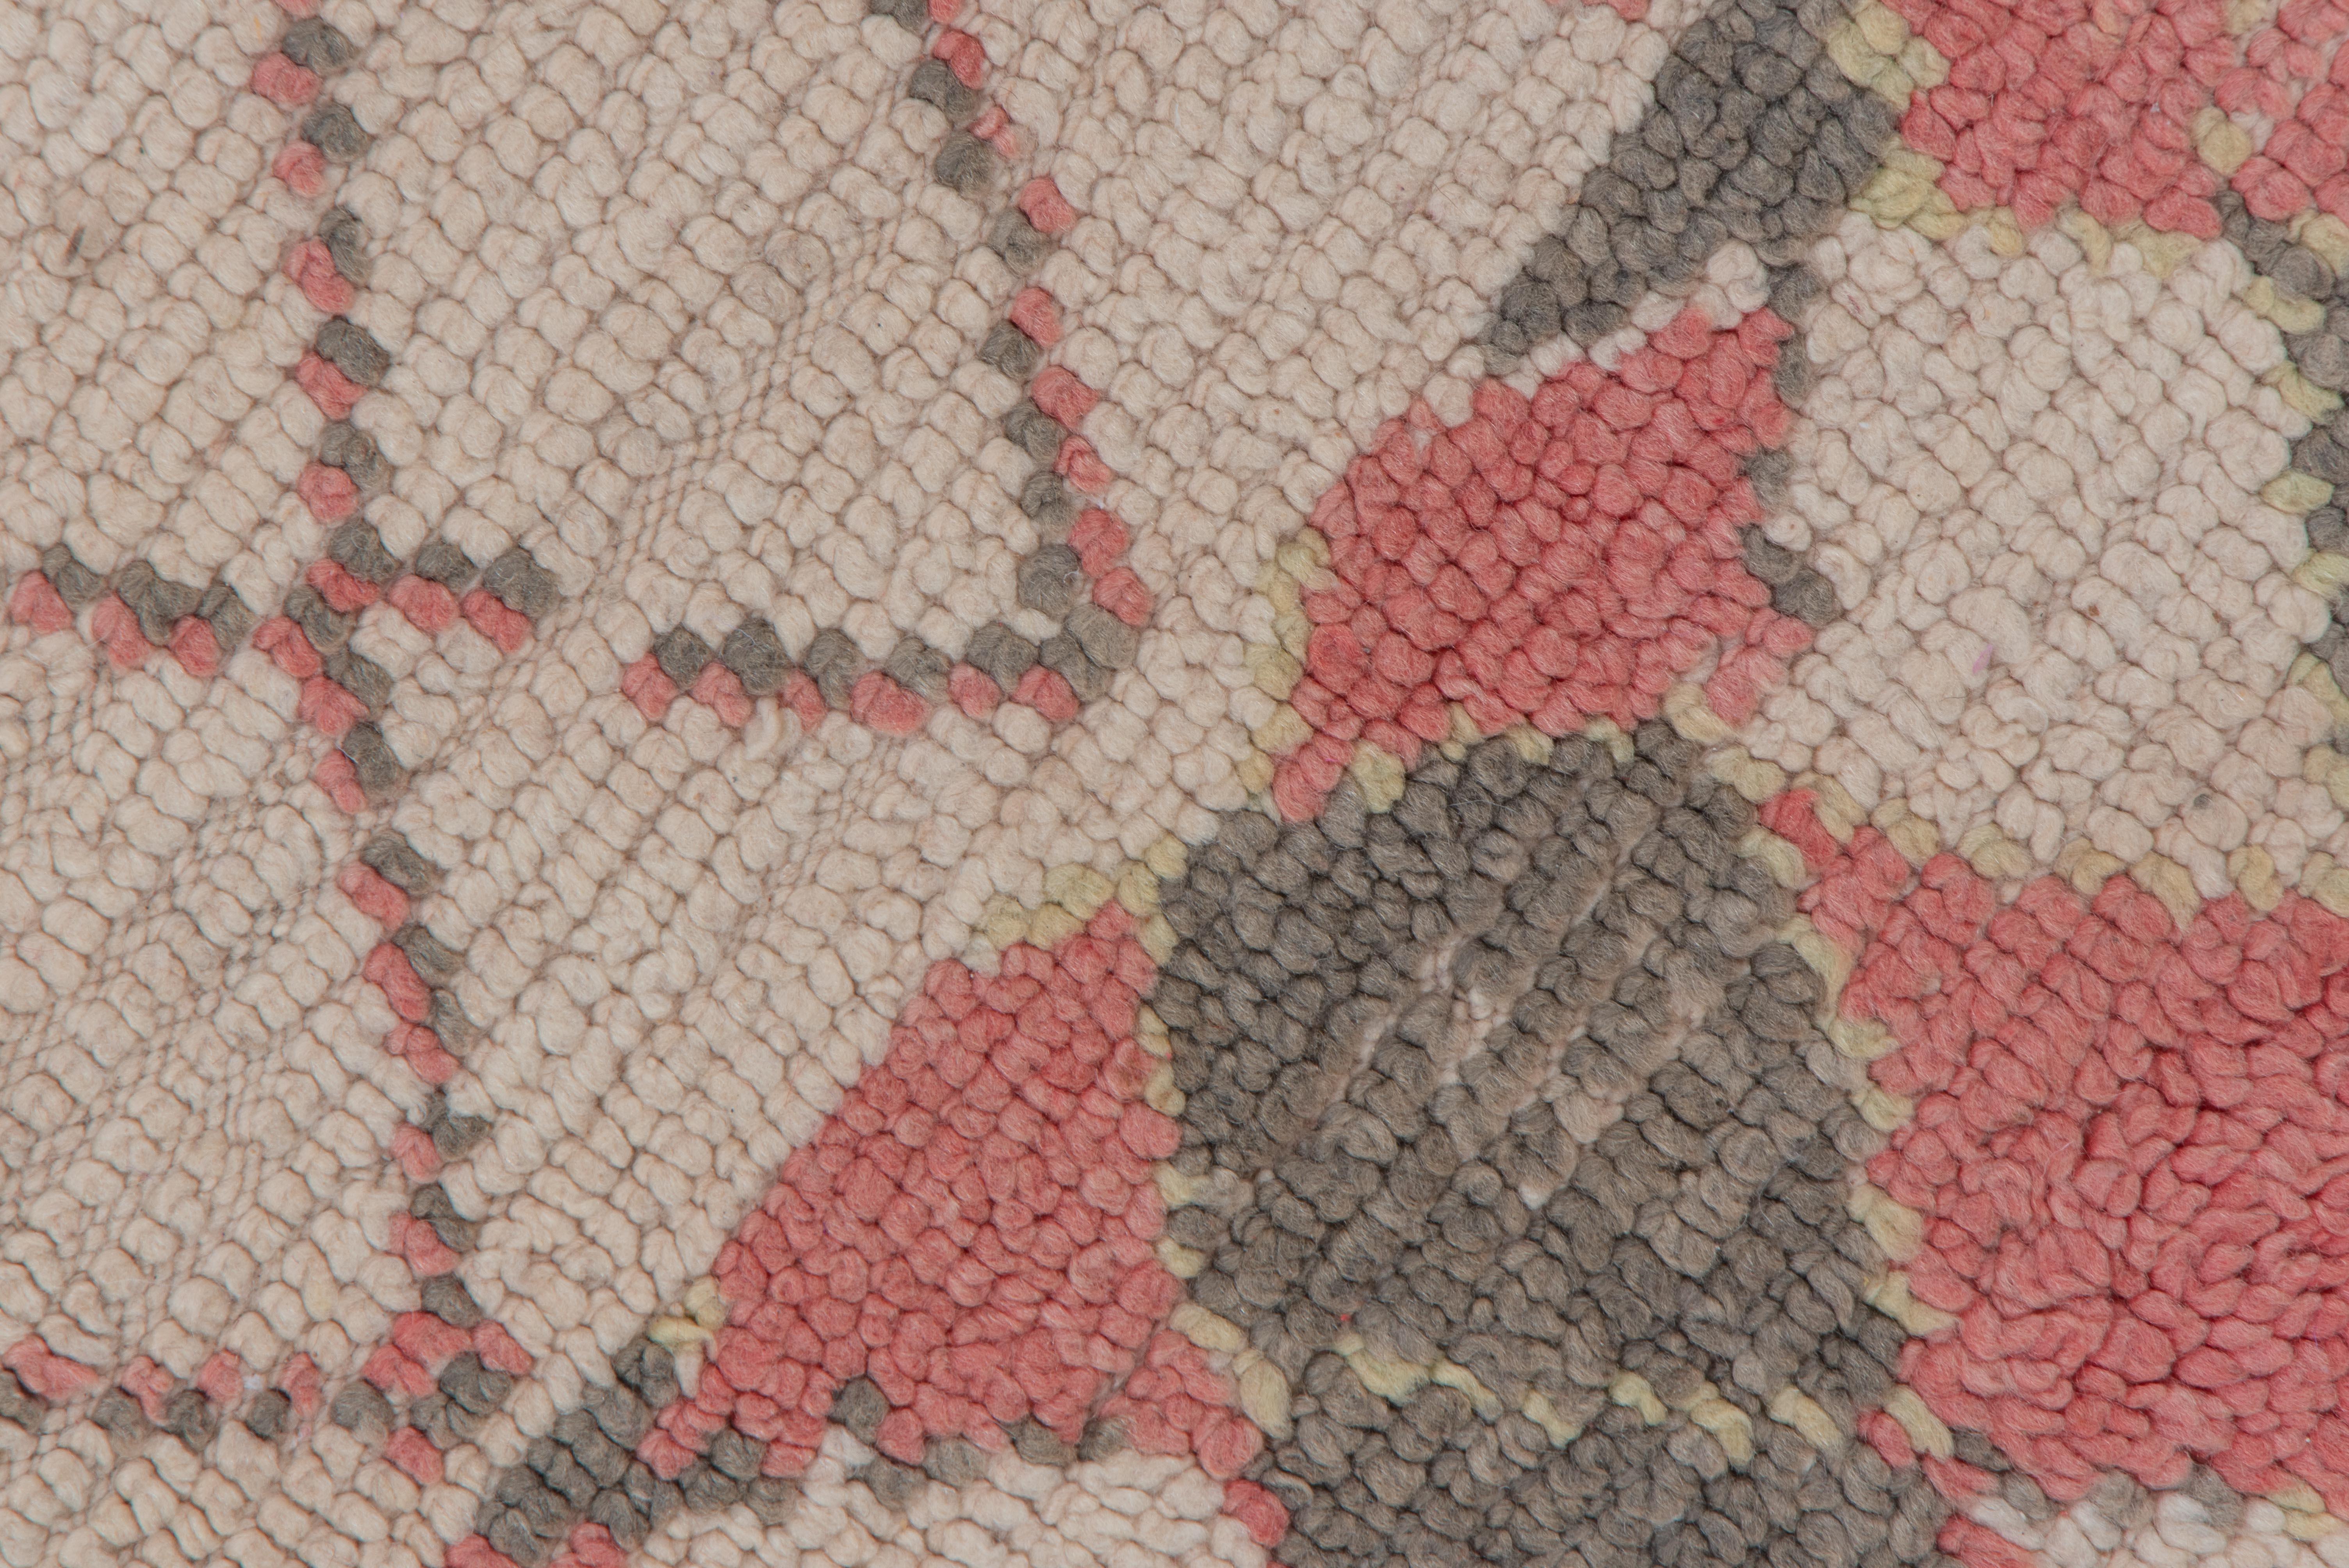 Allover Moroccan Village Rug in Pear Green Clay Red and Faded Black In Good Condition For Sale In New York, NY